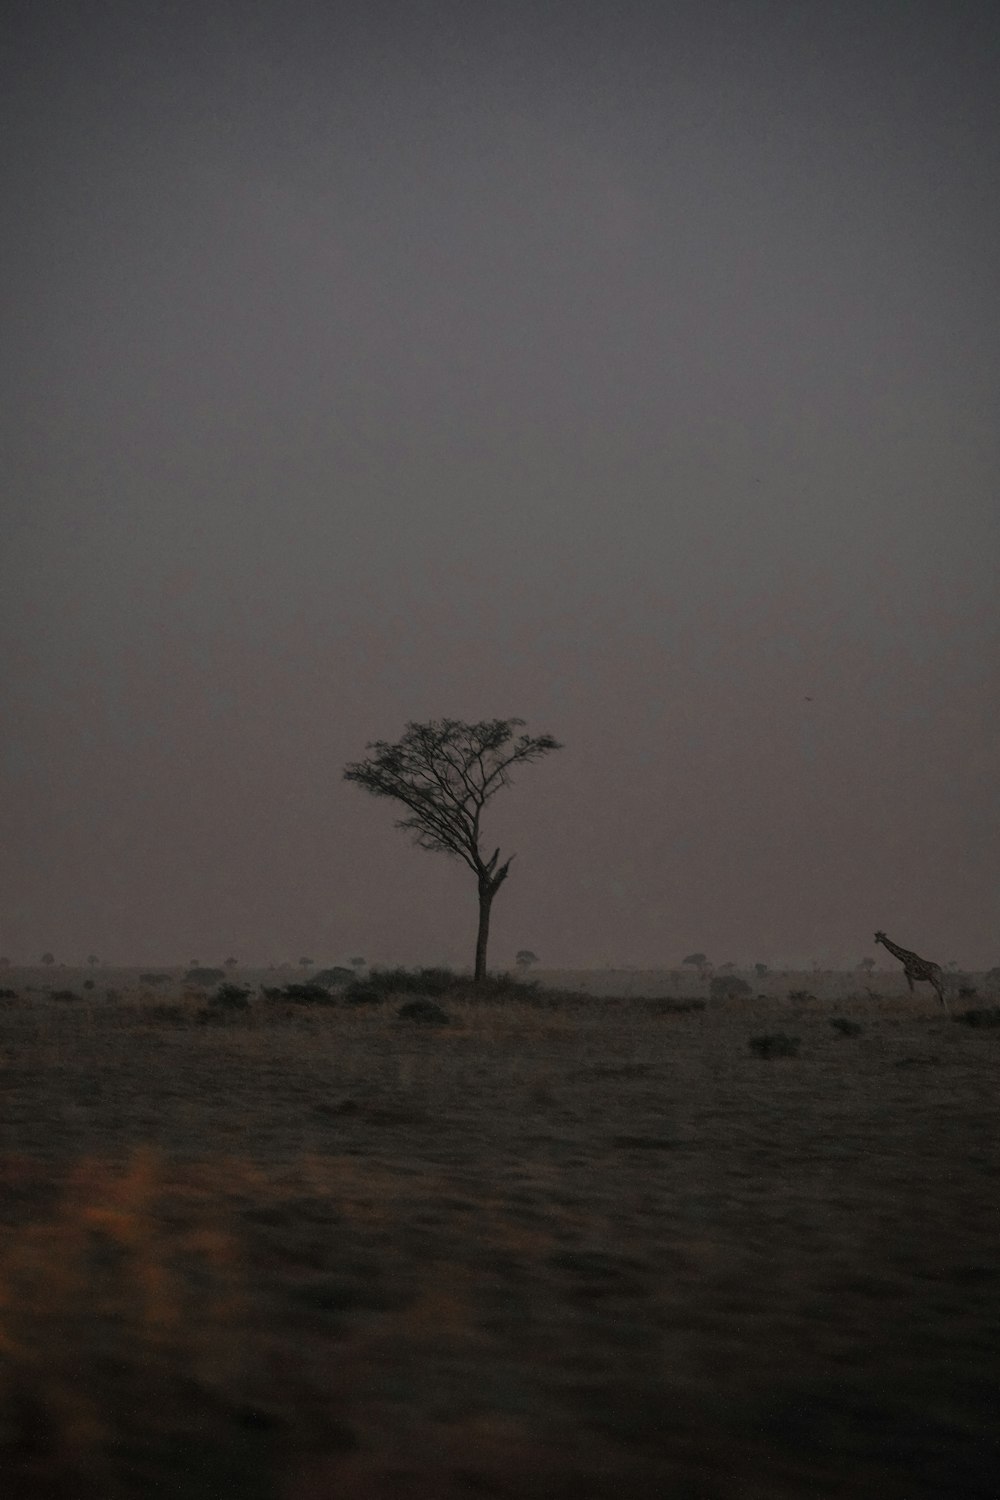 a giraffe and a tree in a field